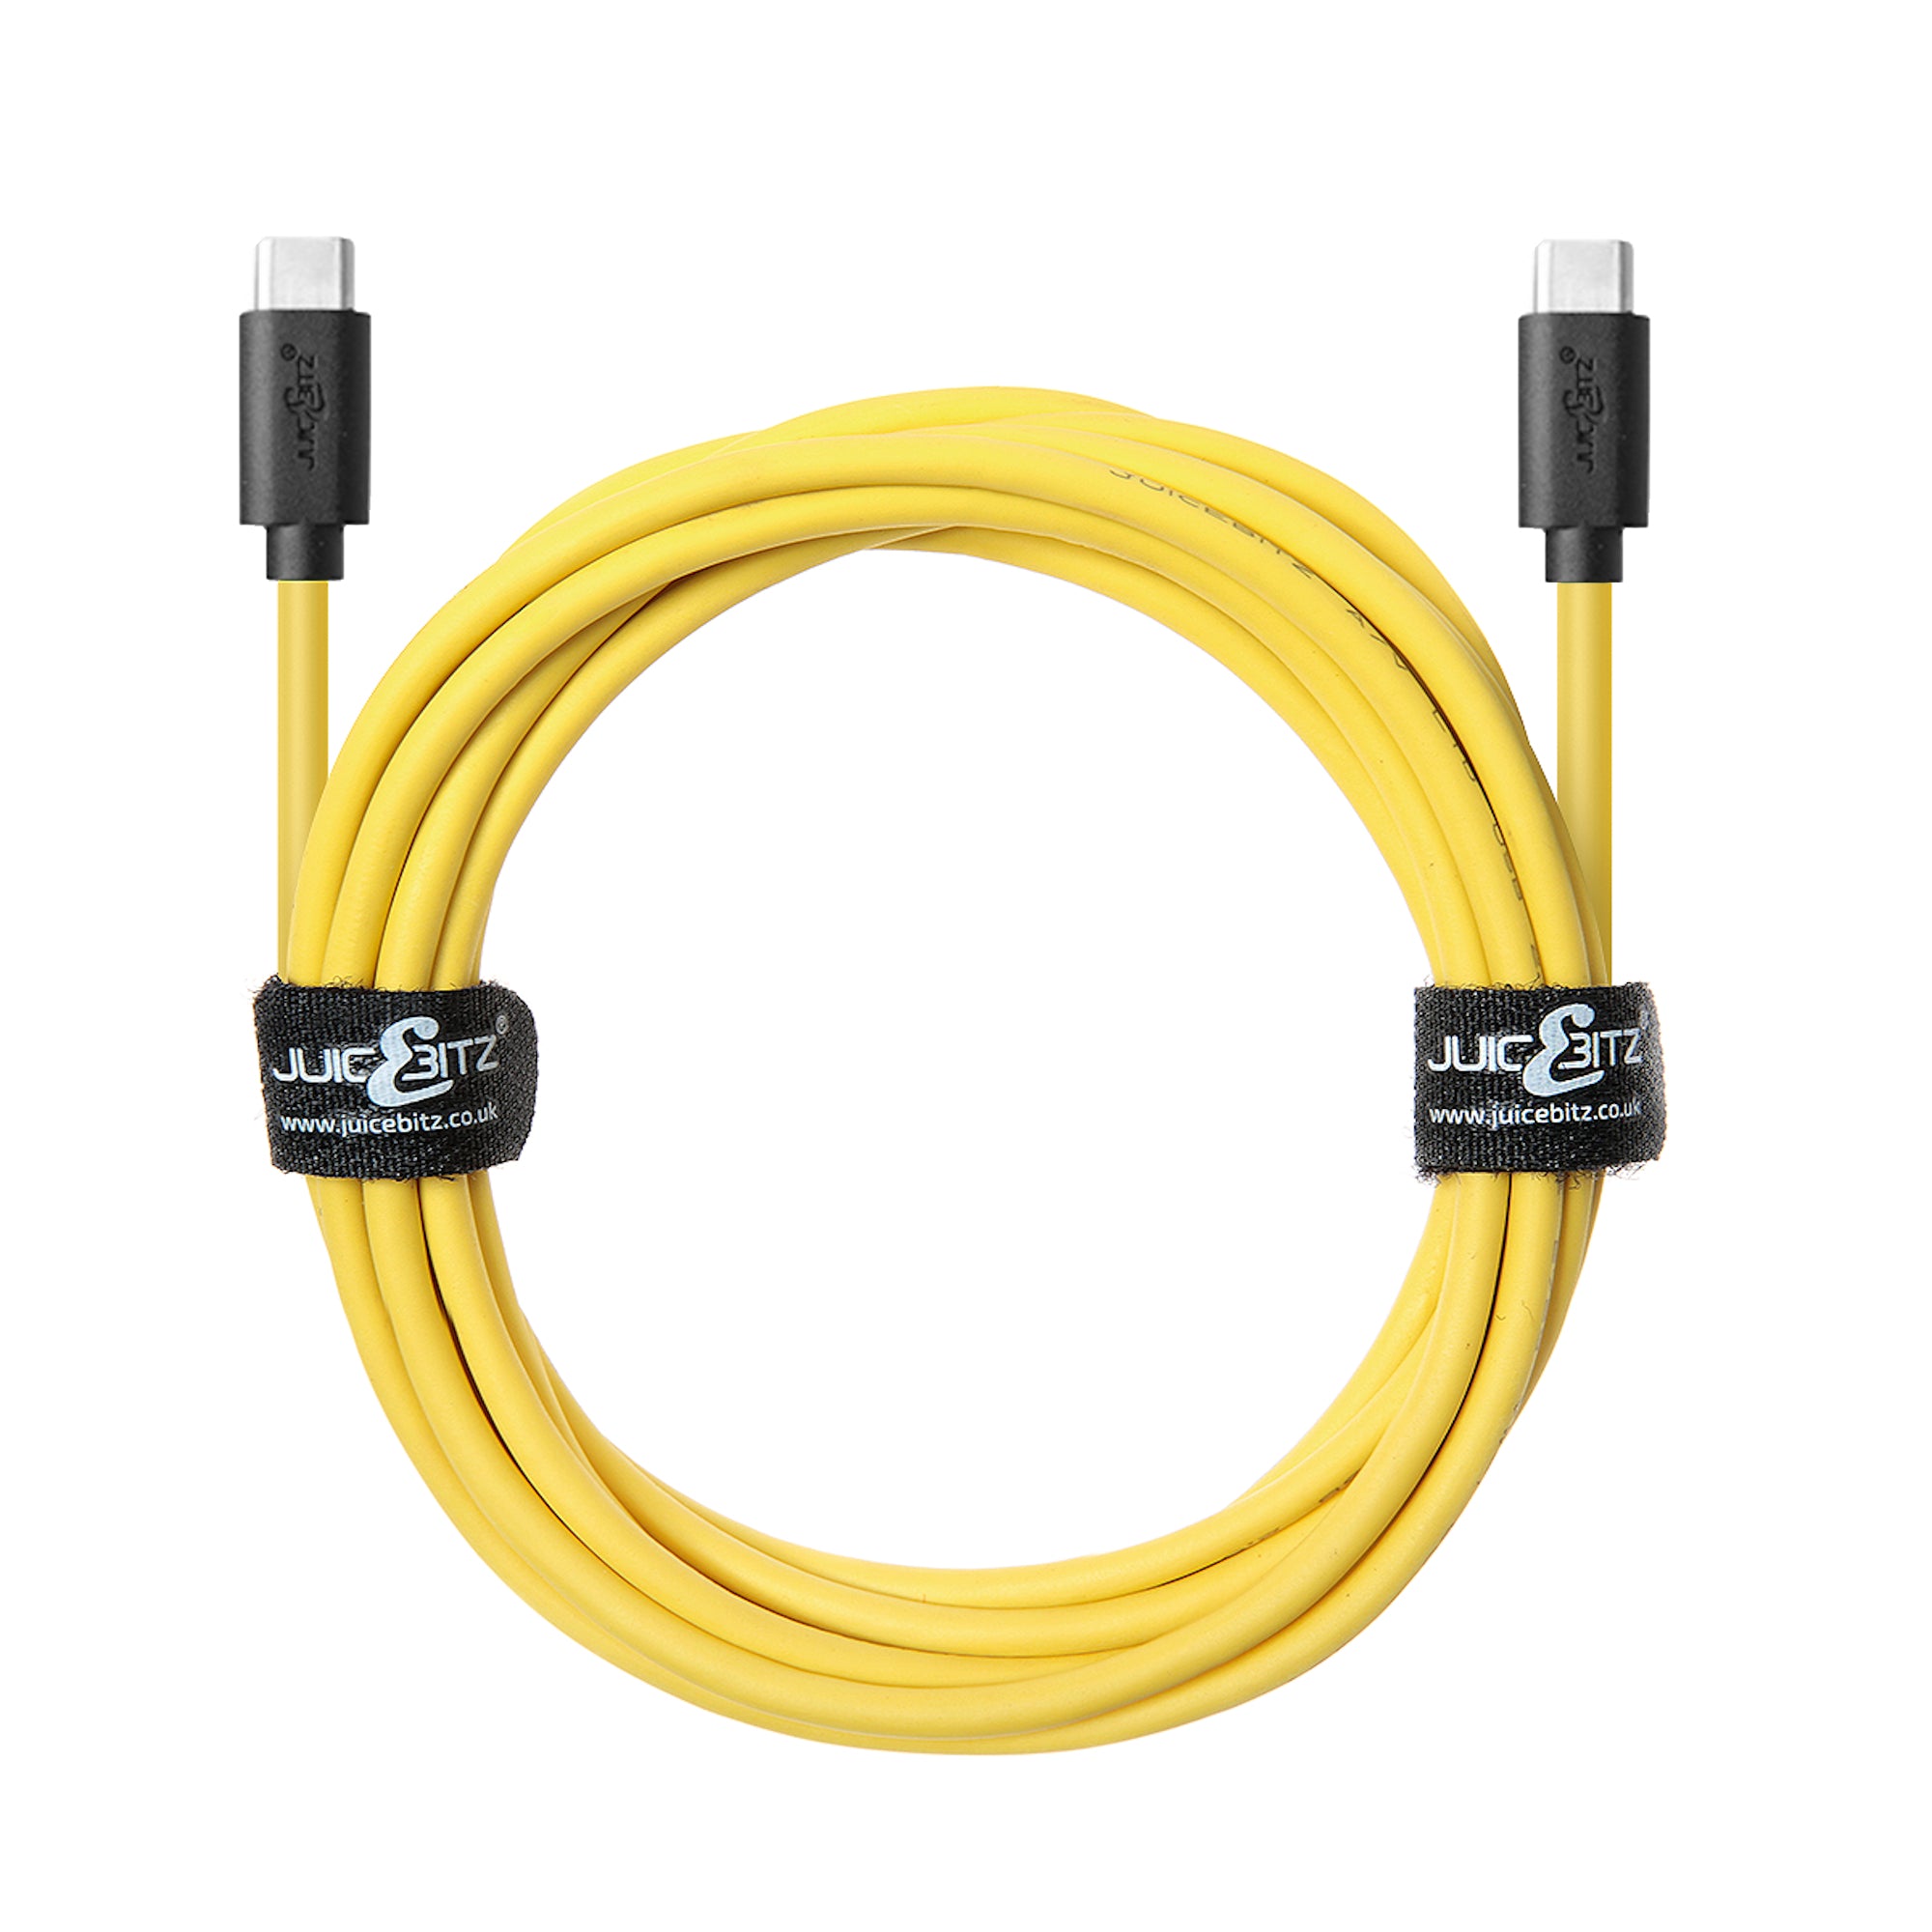 USB-C to USB-C 3A Charger Cable USB 2.0 Data Transfer Lead - Yellow